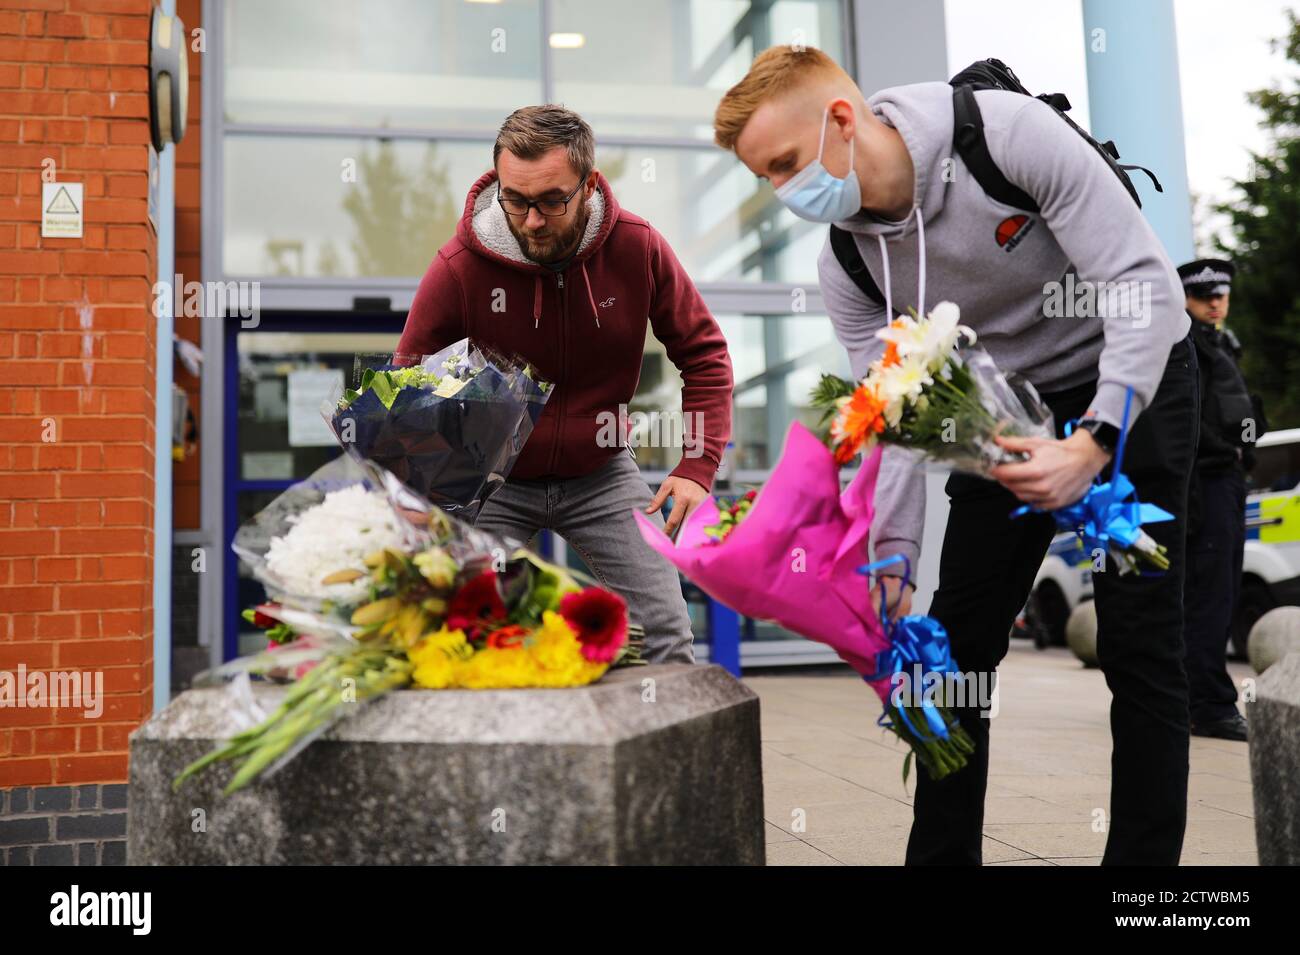 People leave flowers at Croydon Custody Centre in south London where a police officer was shot by a man who was being detained in the early hours of Friday morning. The officer was treated at the scene before being taken to hospital where he subsequently died. Stock Photo